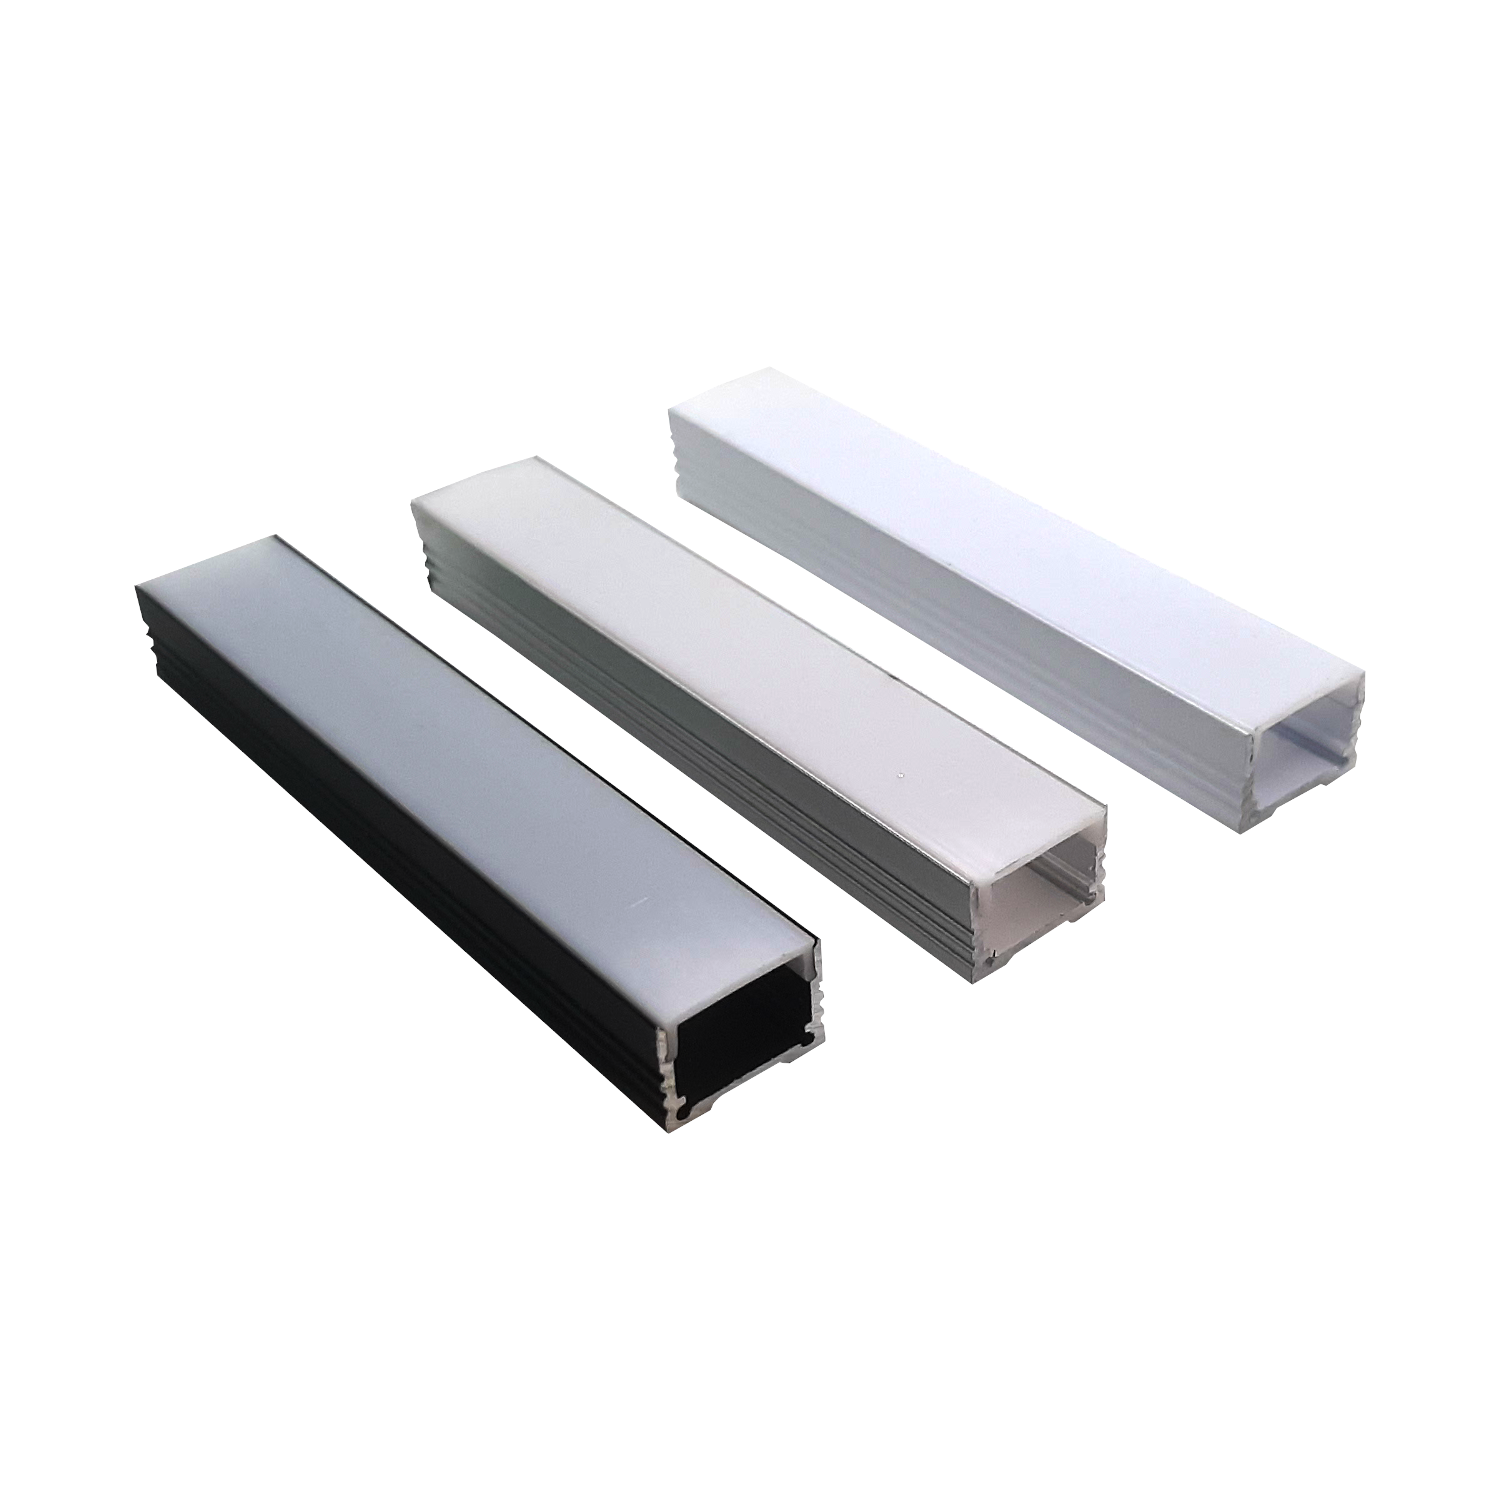 Product image of LXT12 Deep Extrusion for LED strip in 3 colours